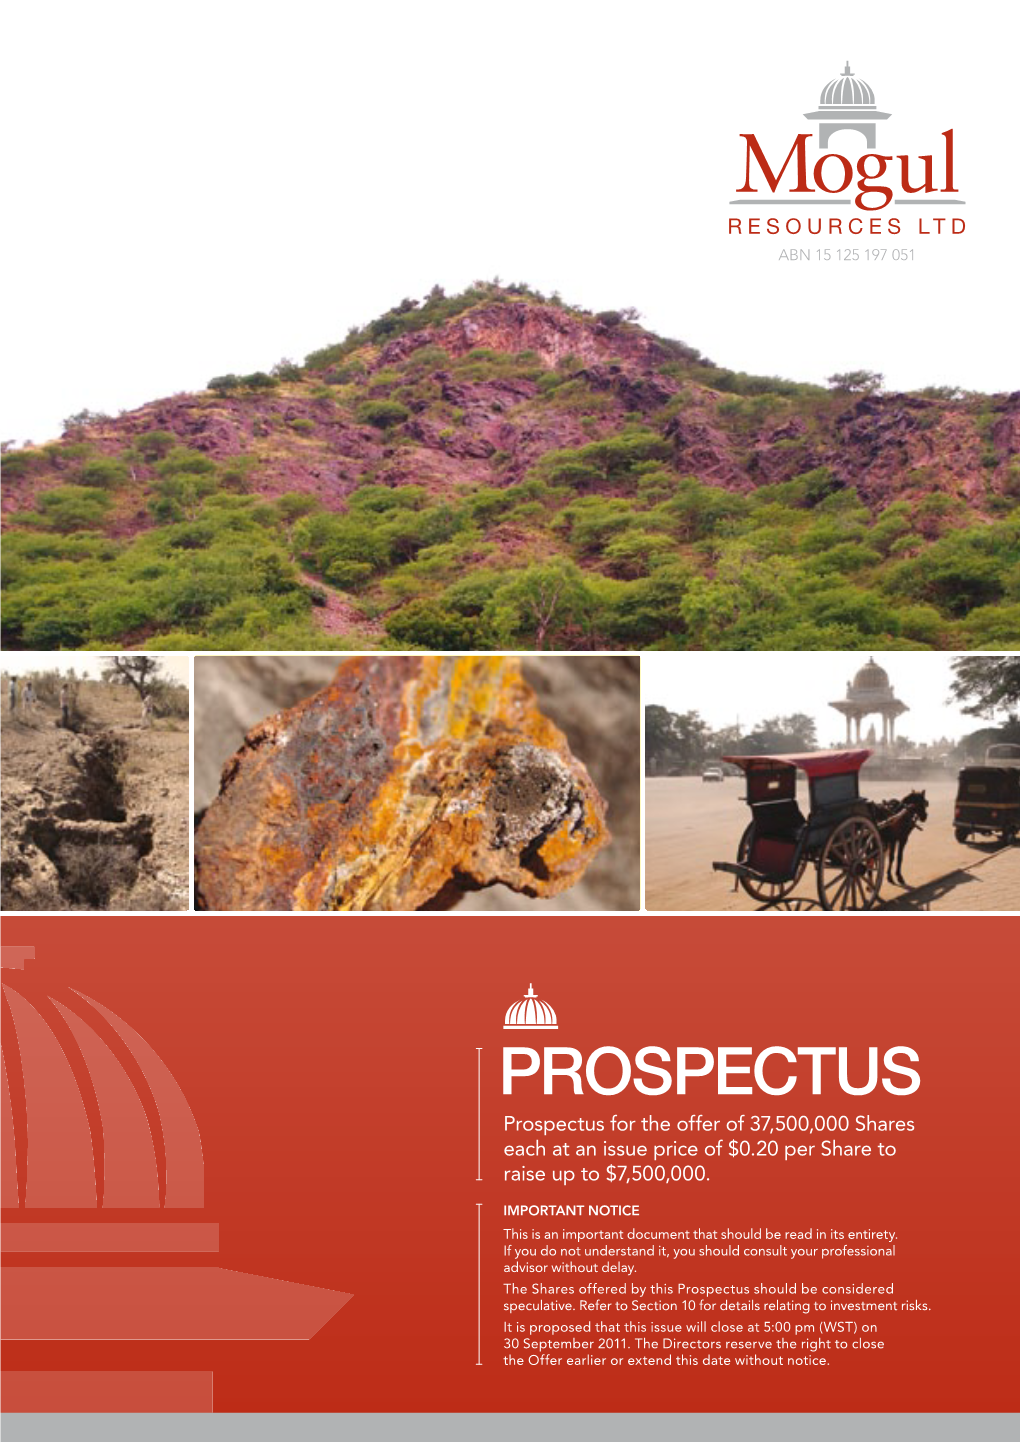 Prospectus Should Be Considered Speculative